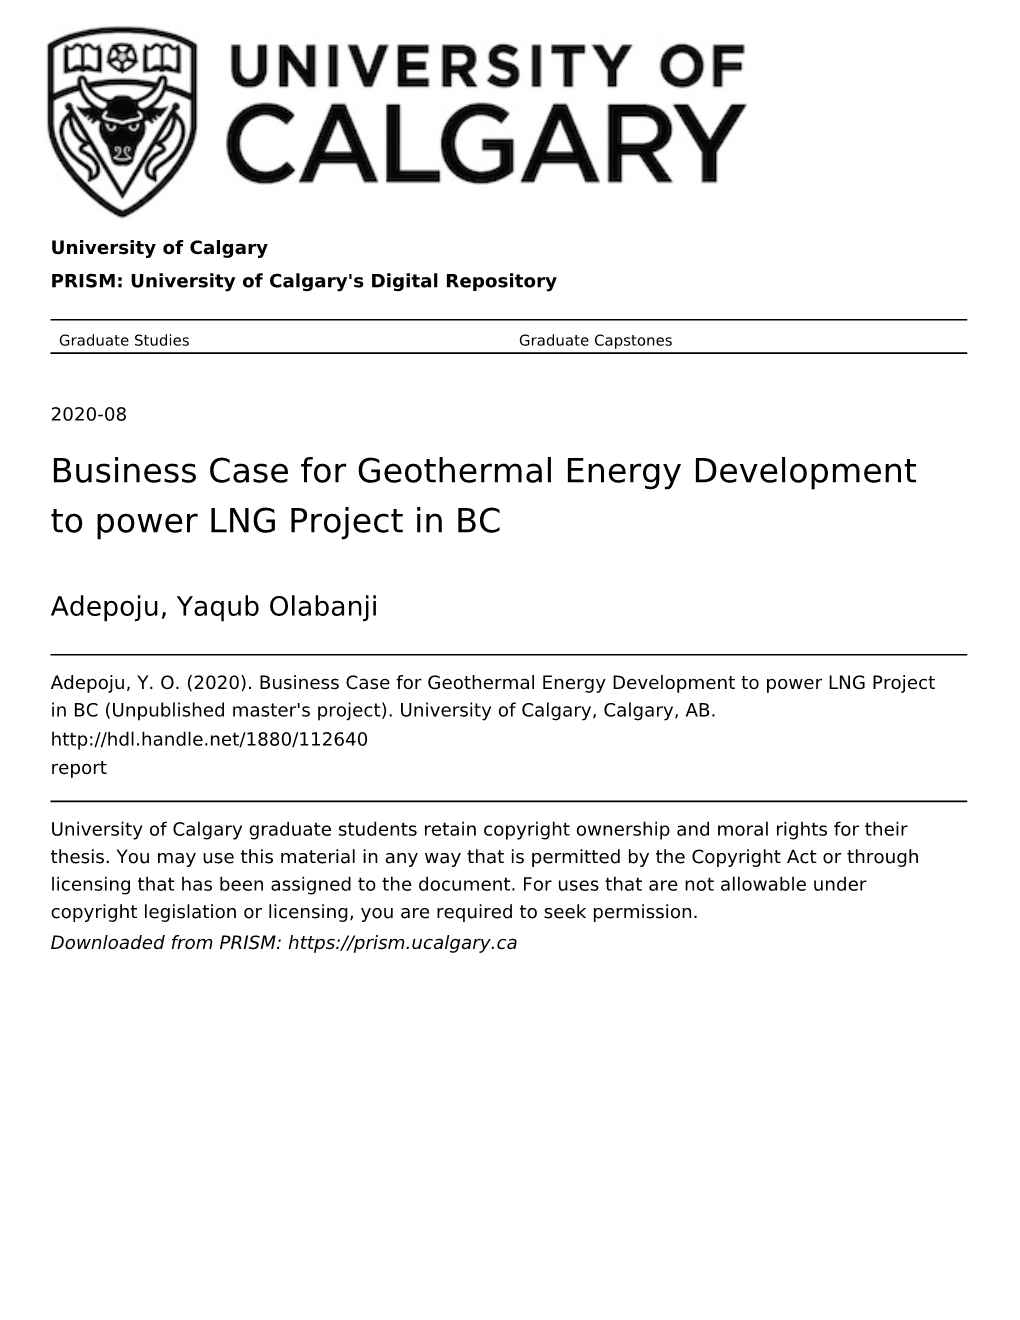 Business Case for Geothermal Energy Development to Power LNG Project in BC